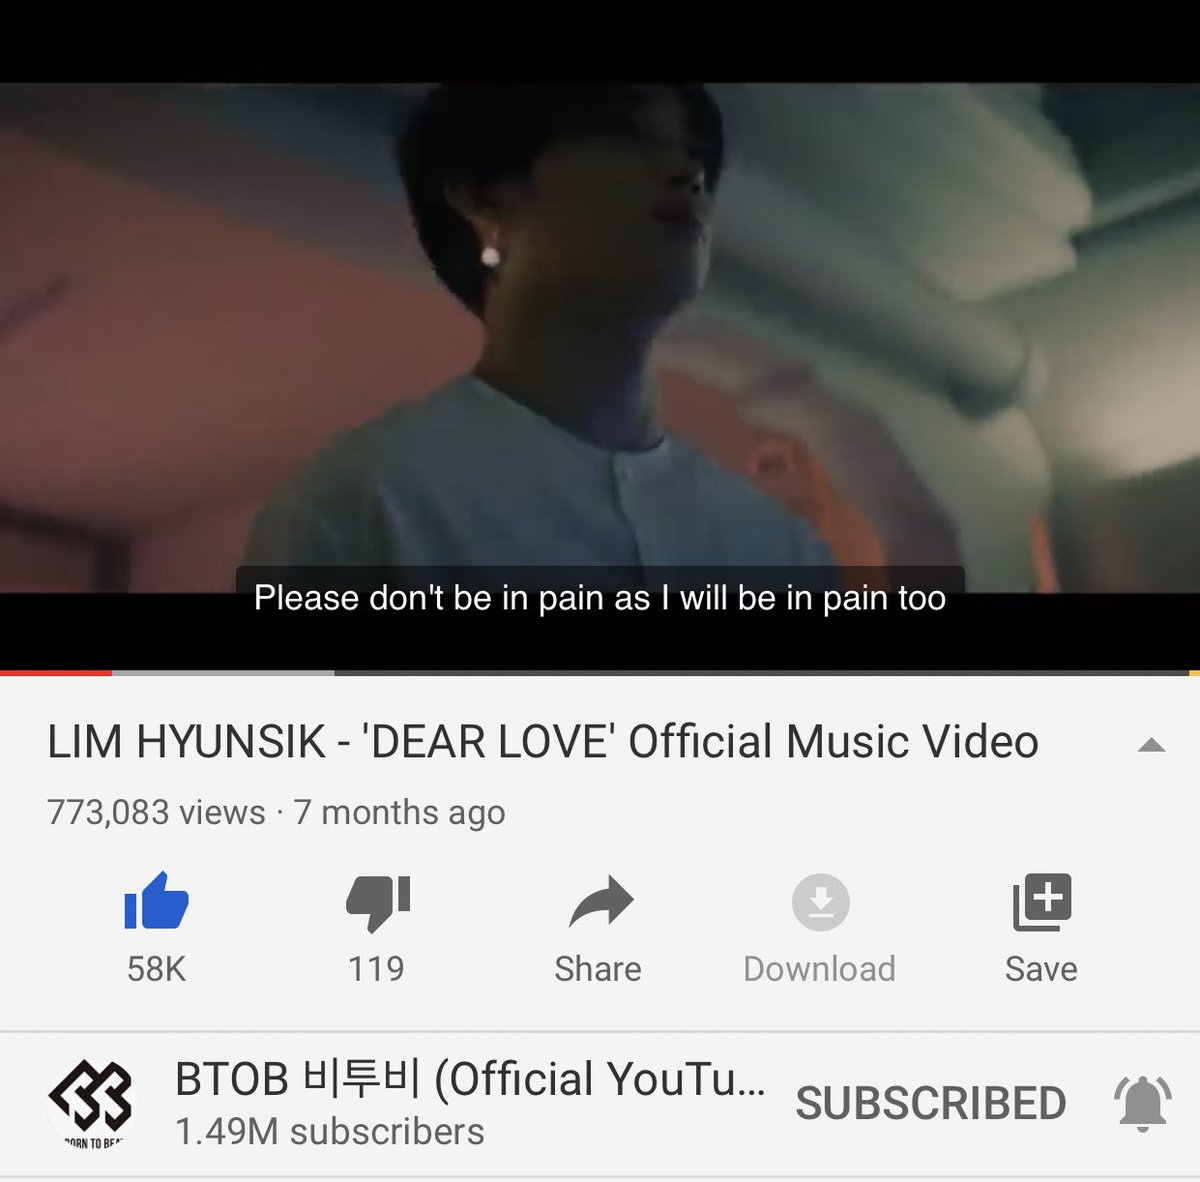 Dear Love view count streaming thread 23MAY2020 11:03AM KST773,083